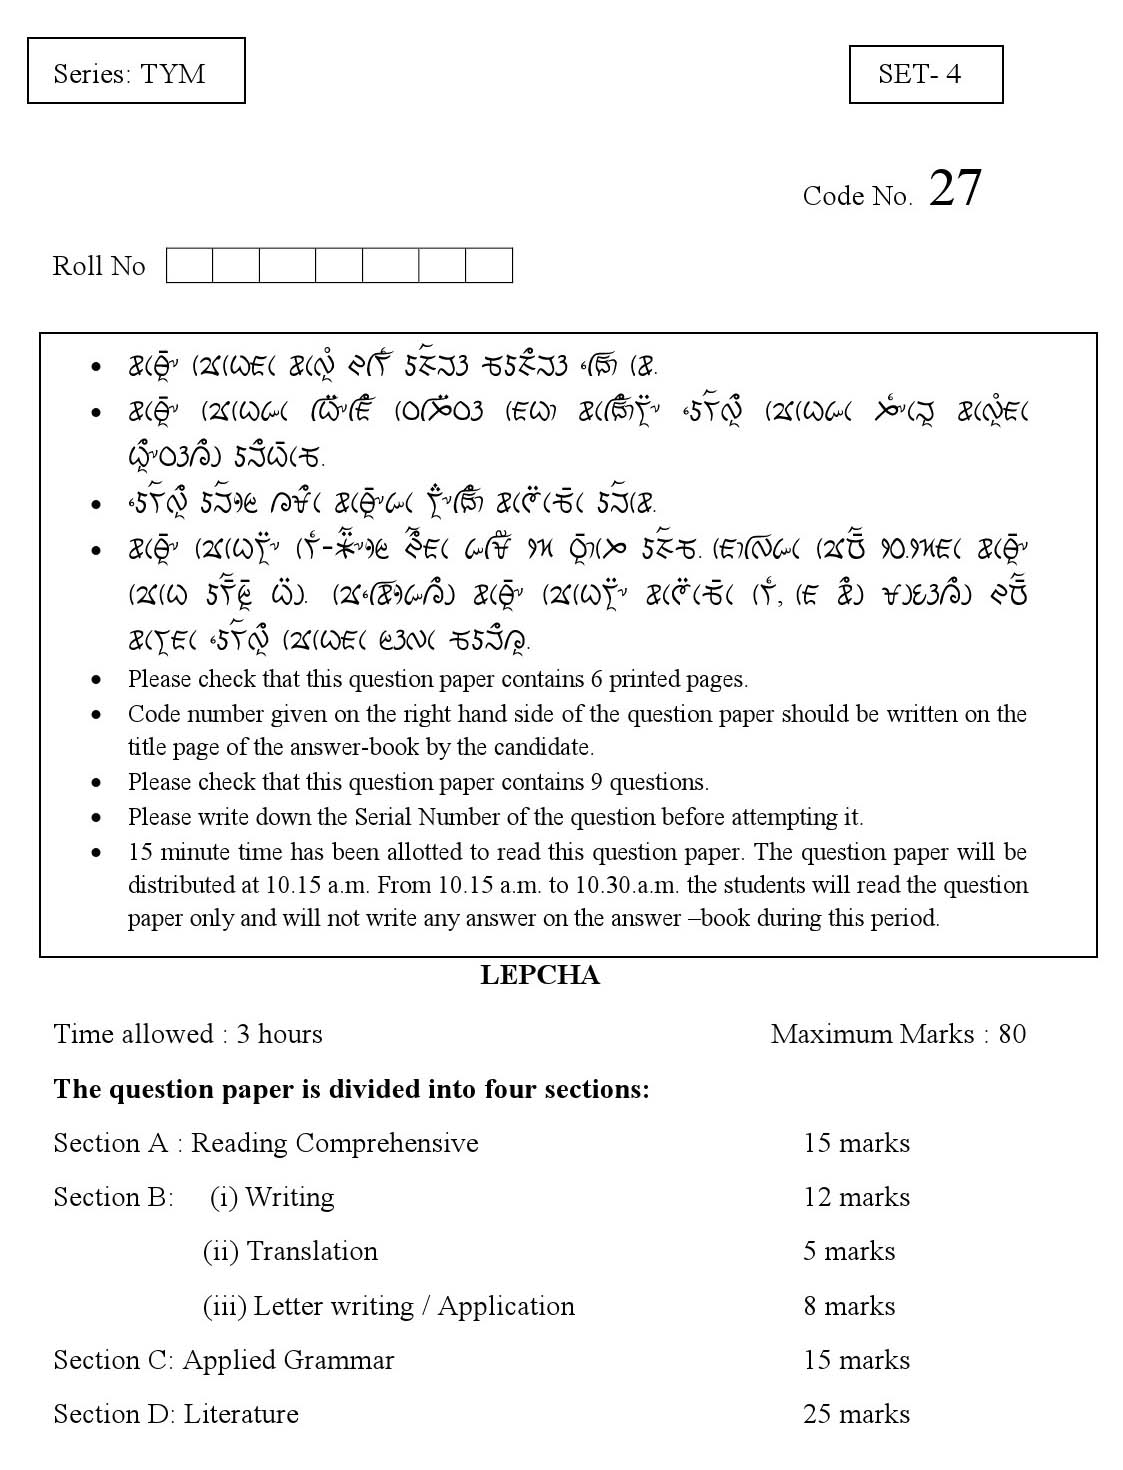 Lepcha CBSE Class X Sample Question Paper 2018-19 - Image 1